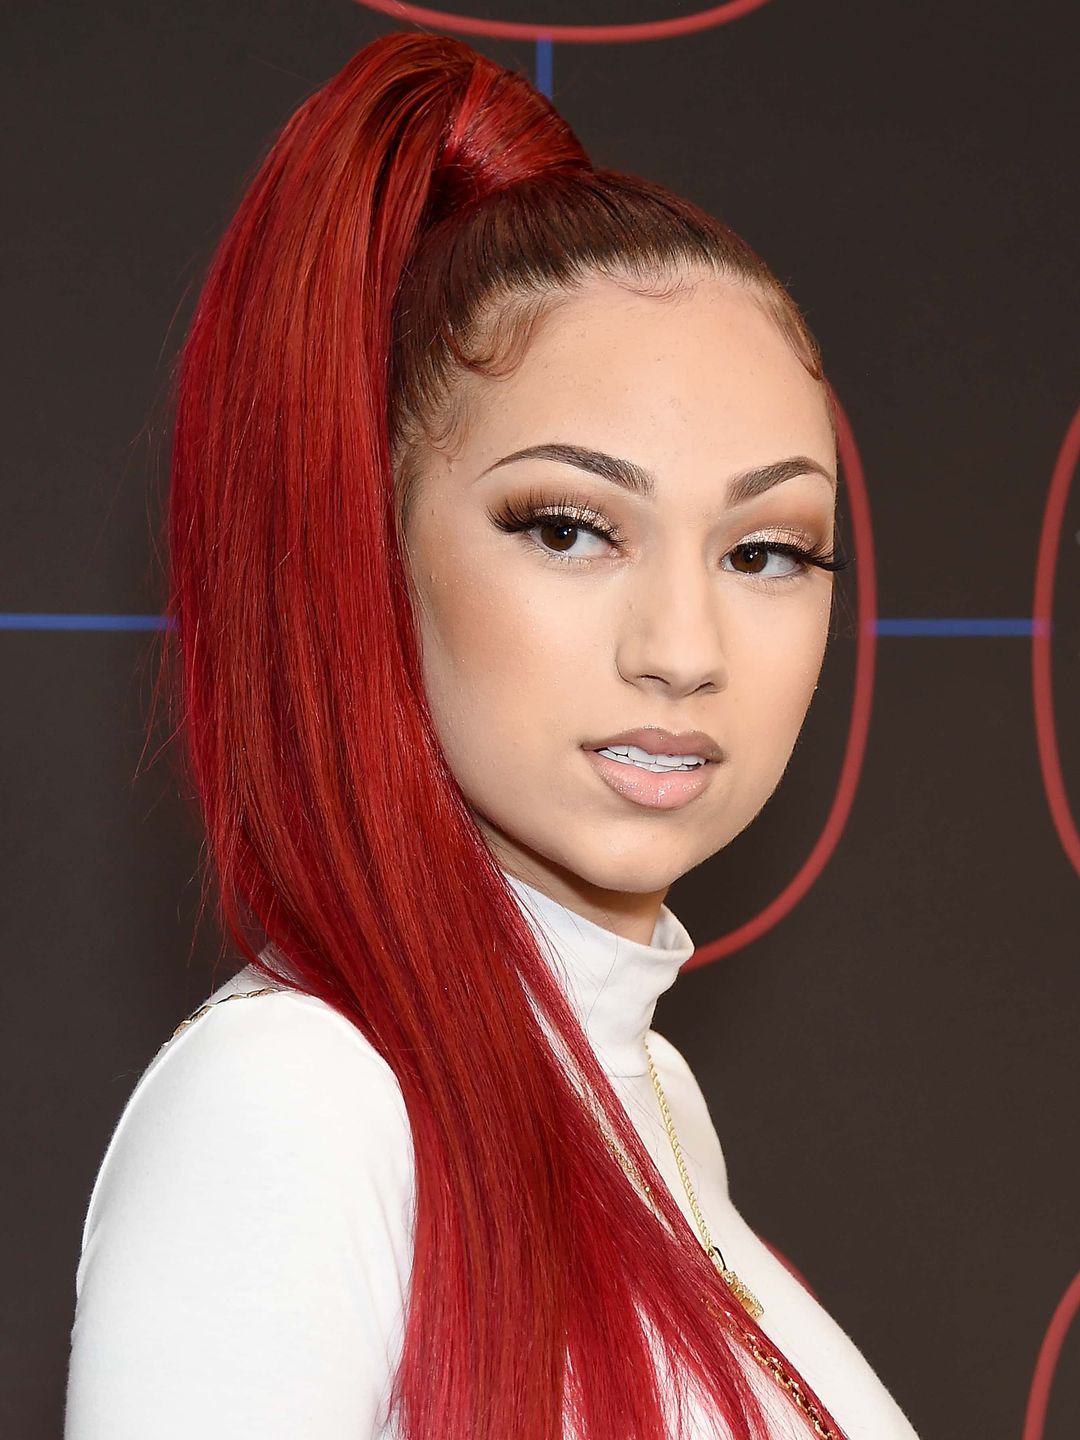 Bhad Bhabie how old is she